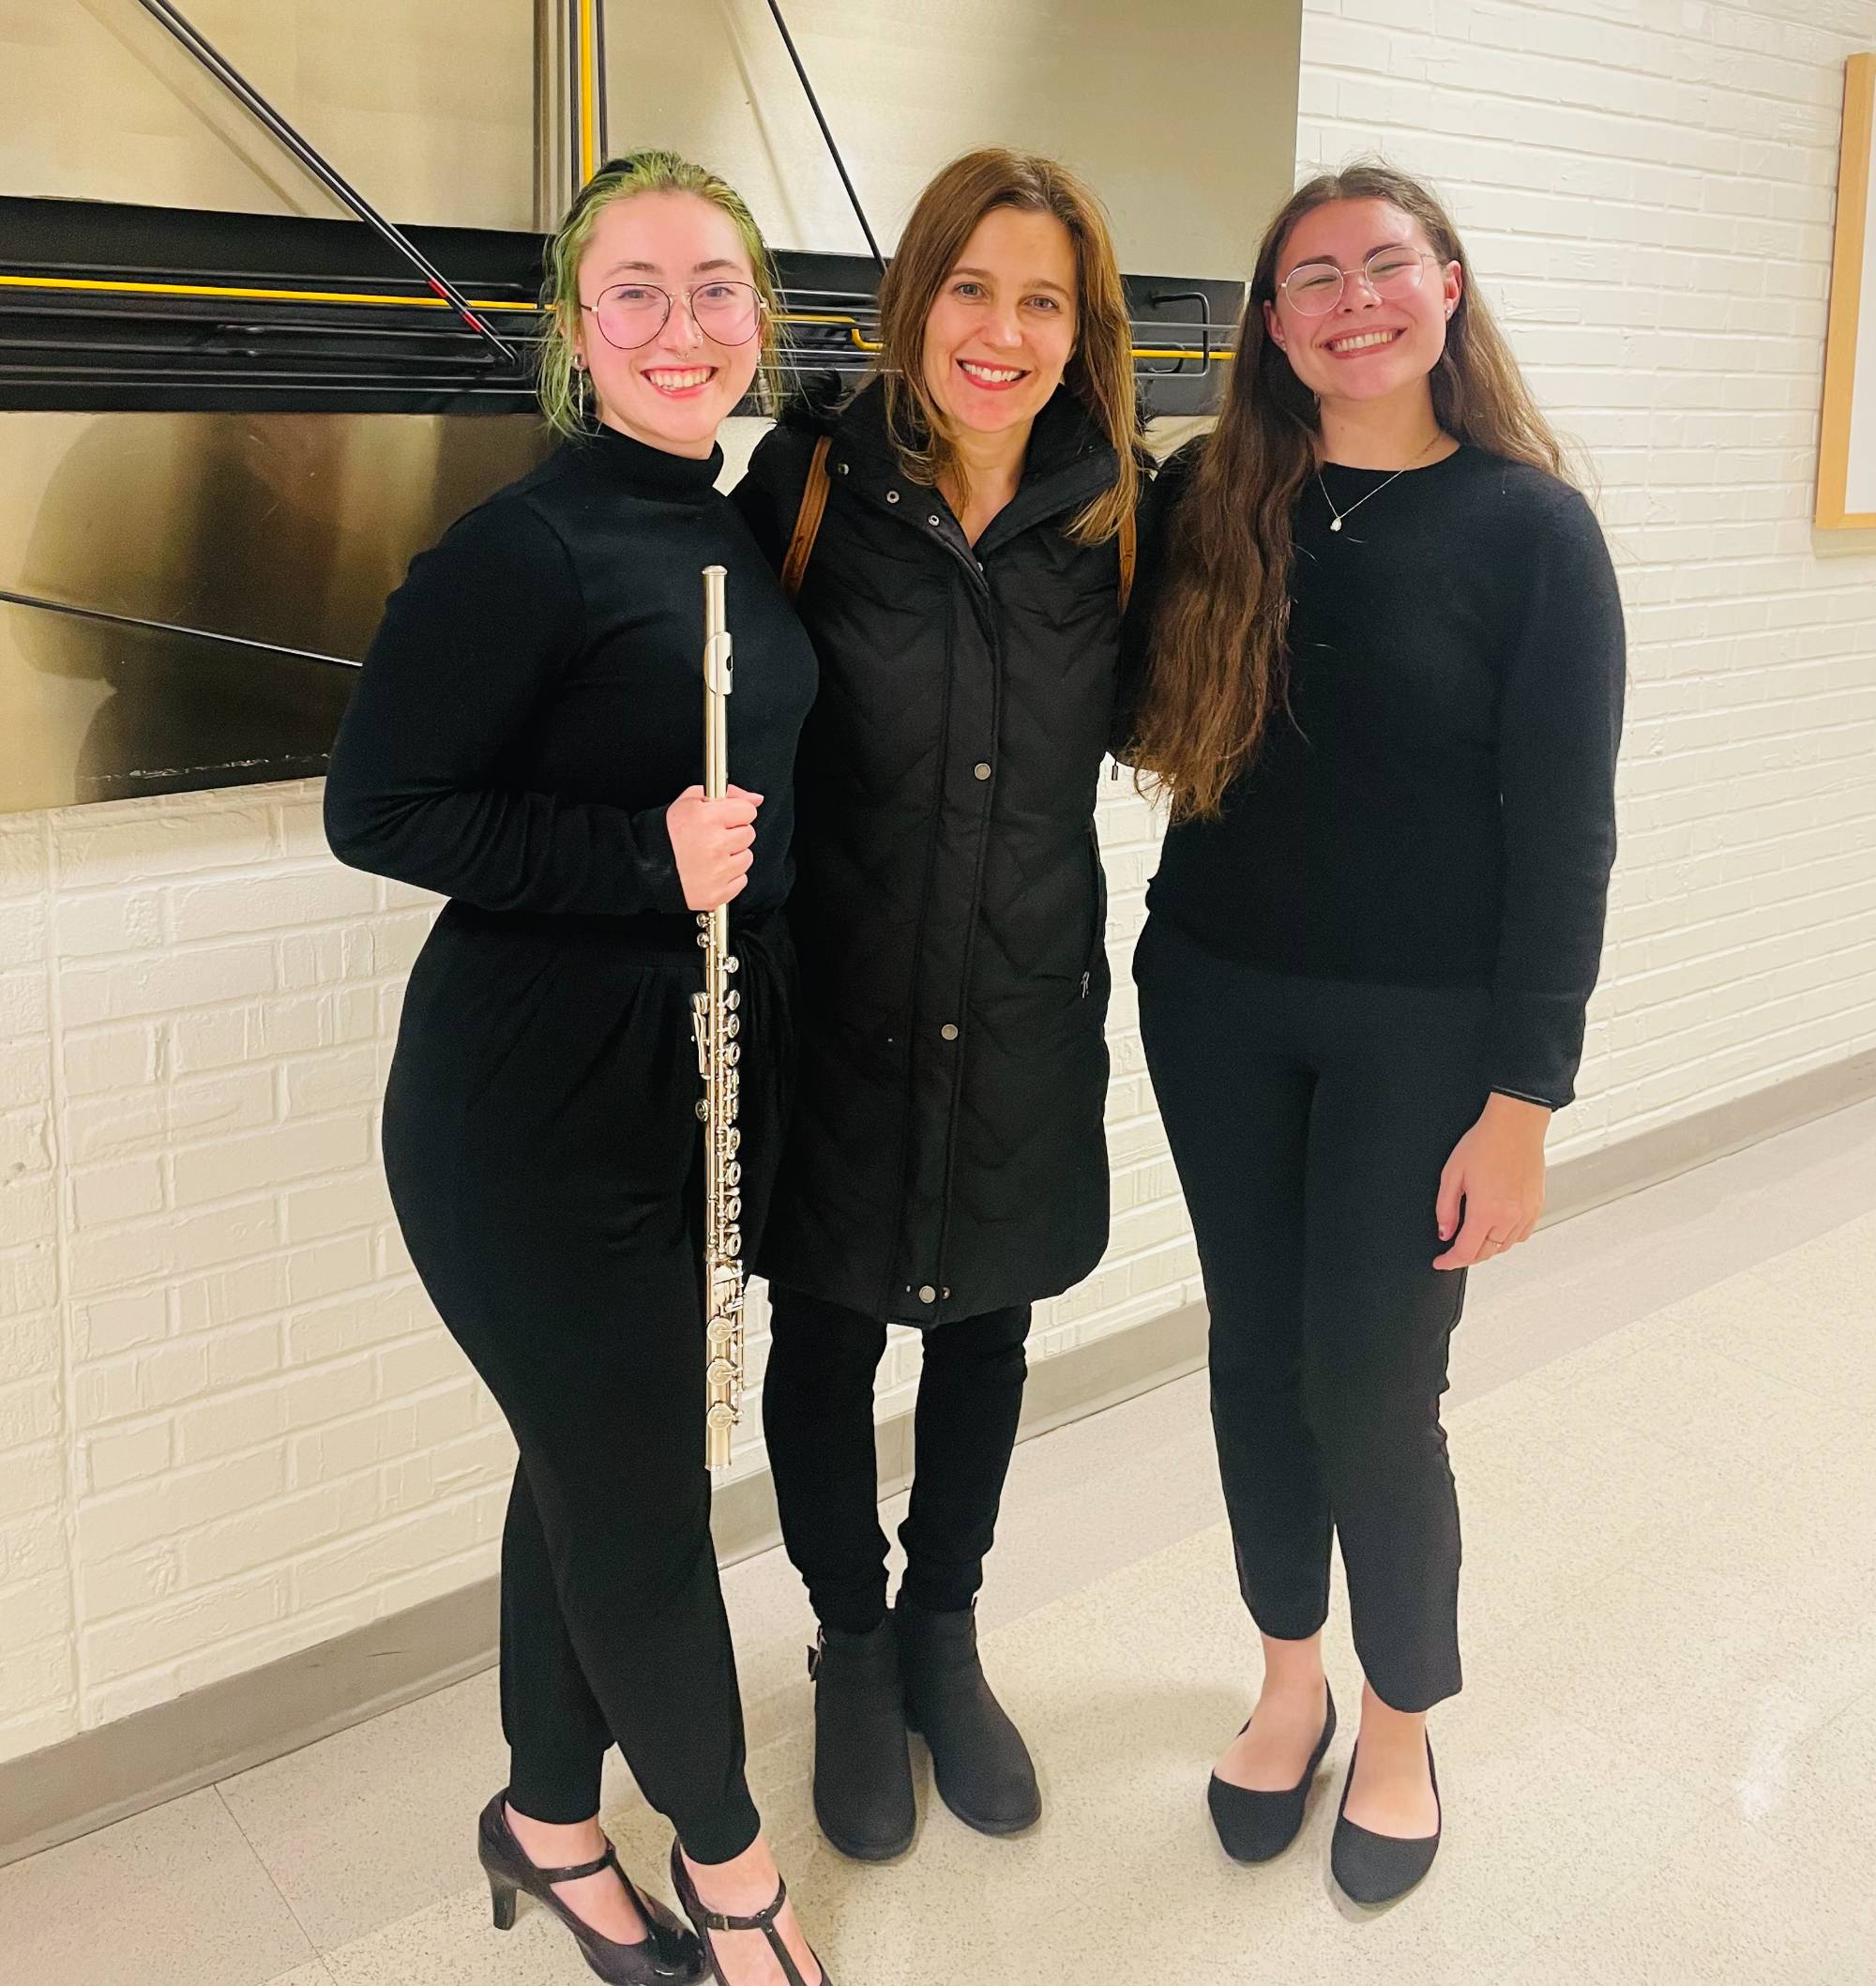 abigail walsh with two flute students